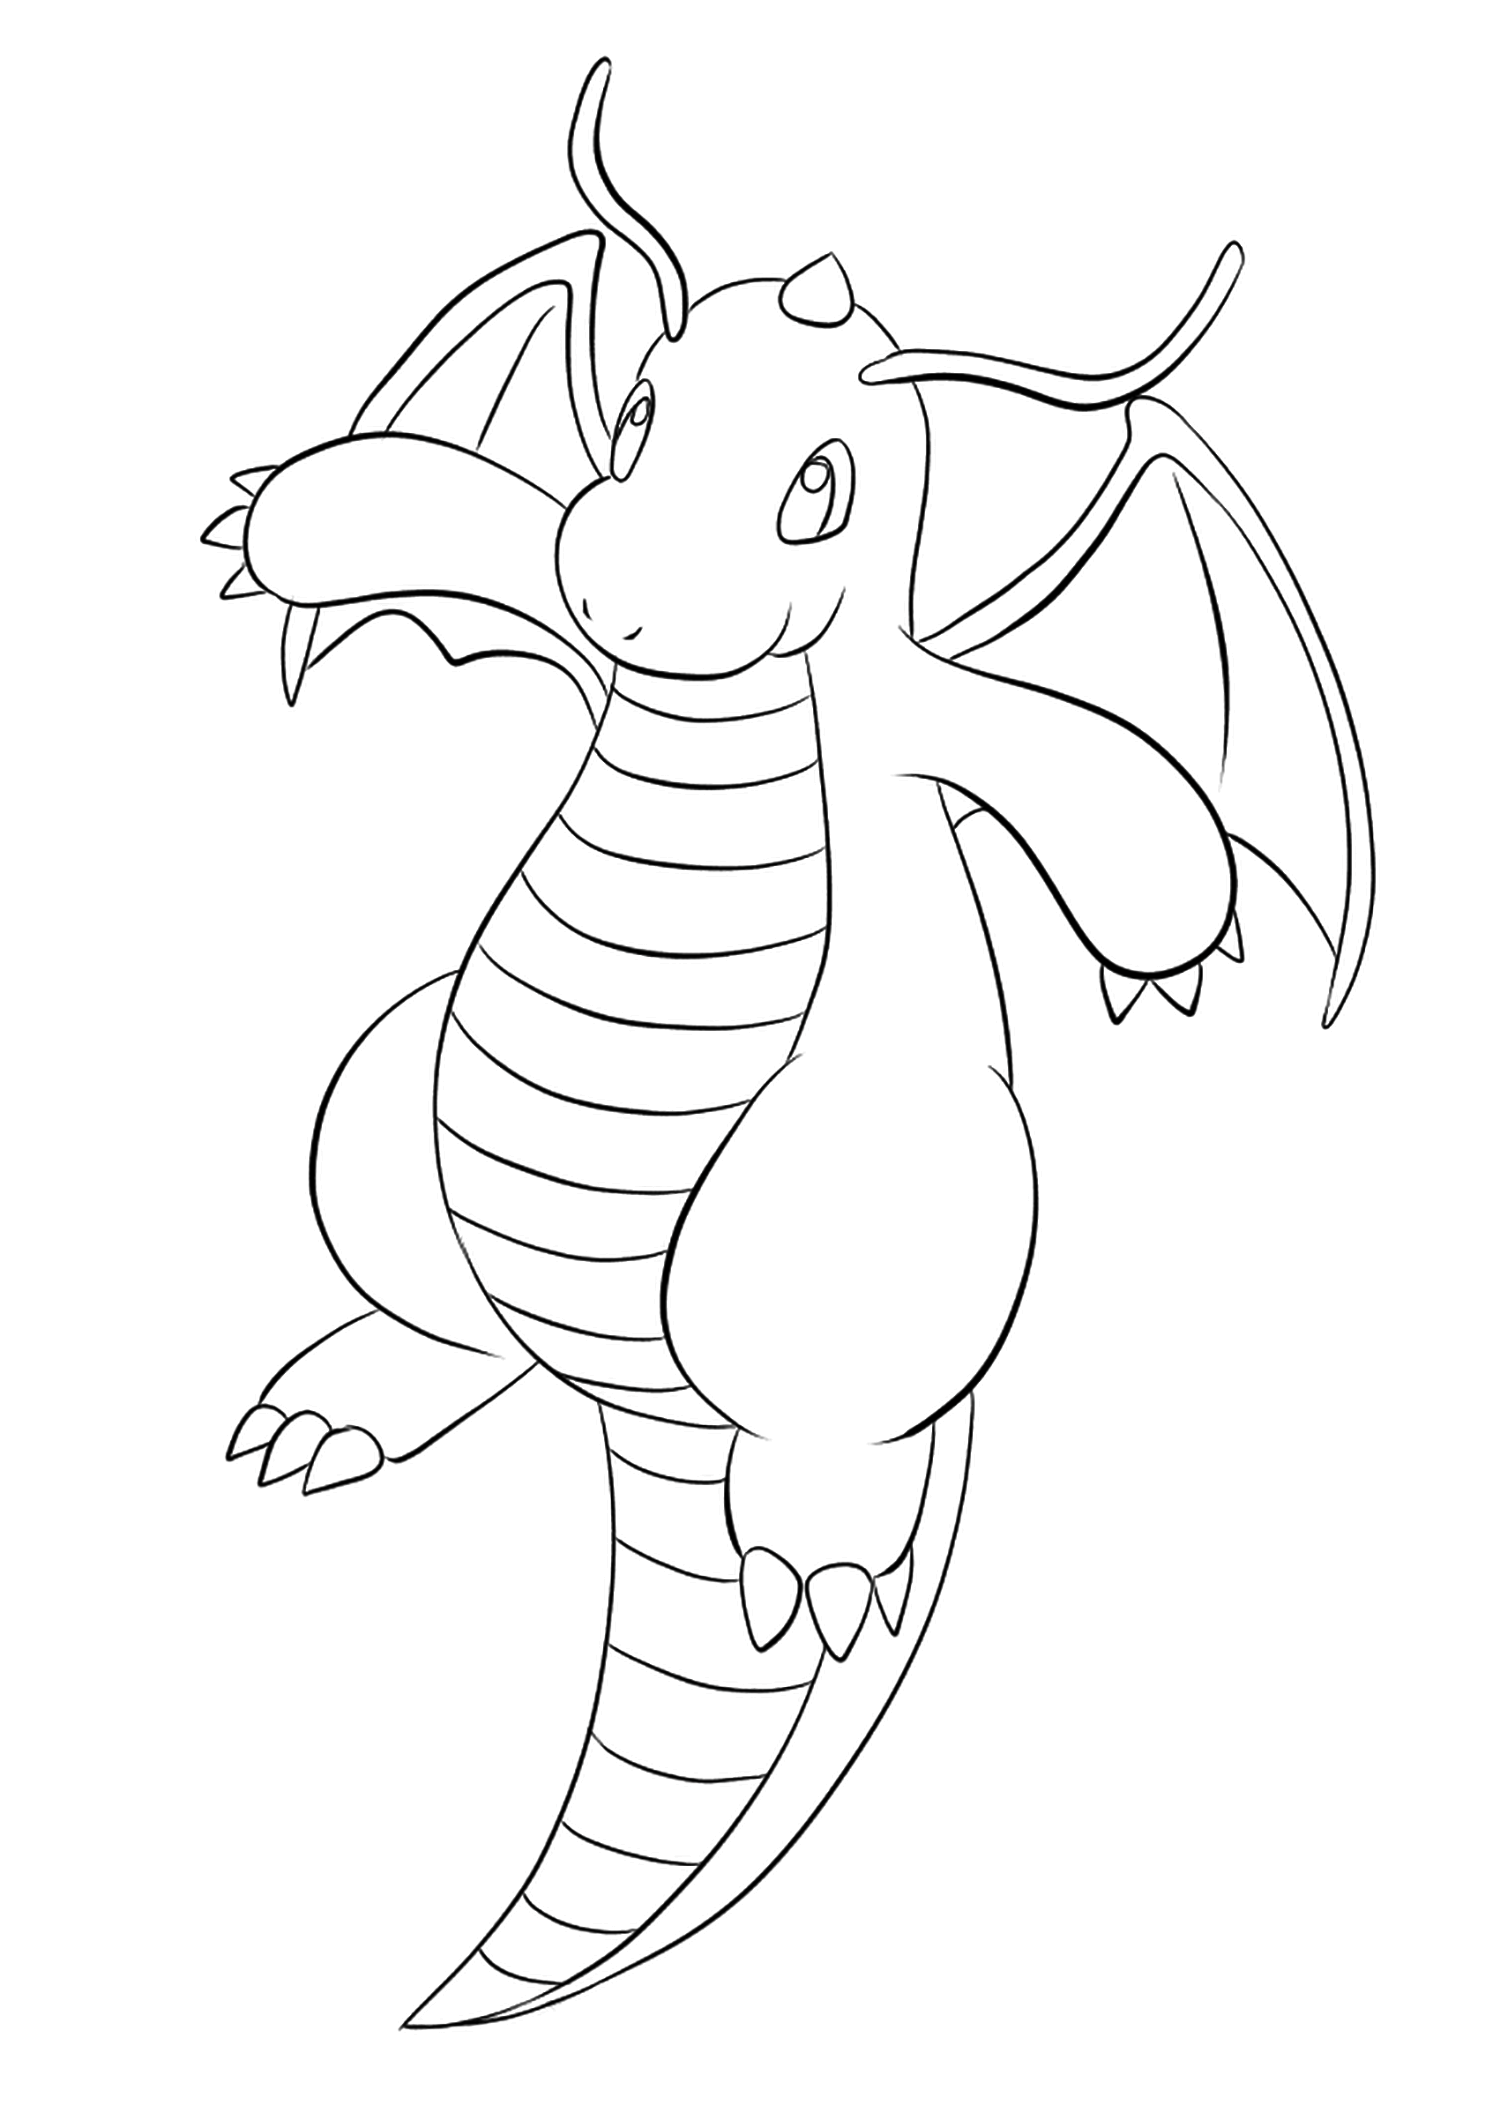 Dragonite Coloring Pages - Coloring Home